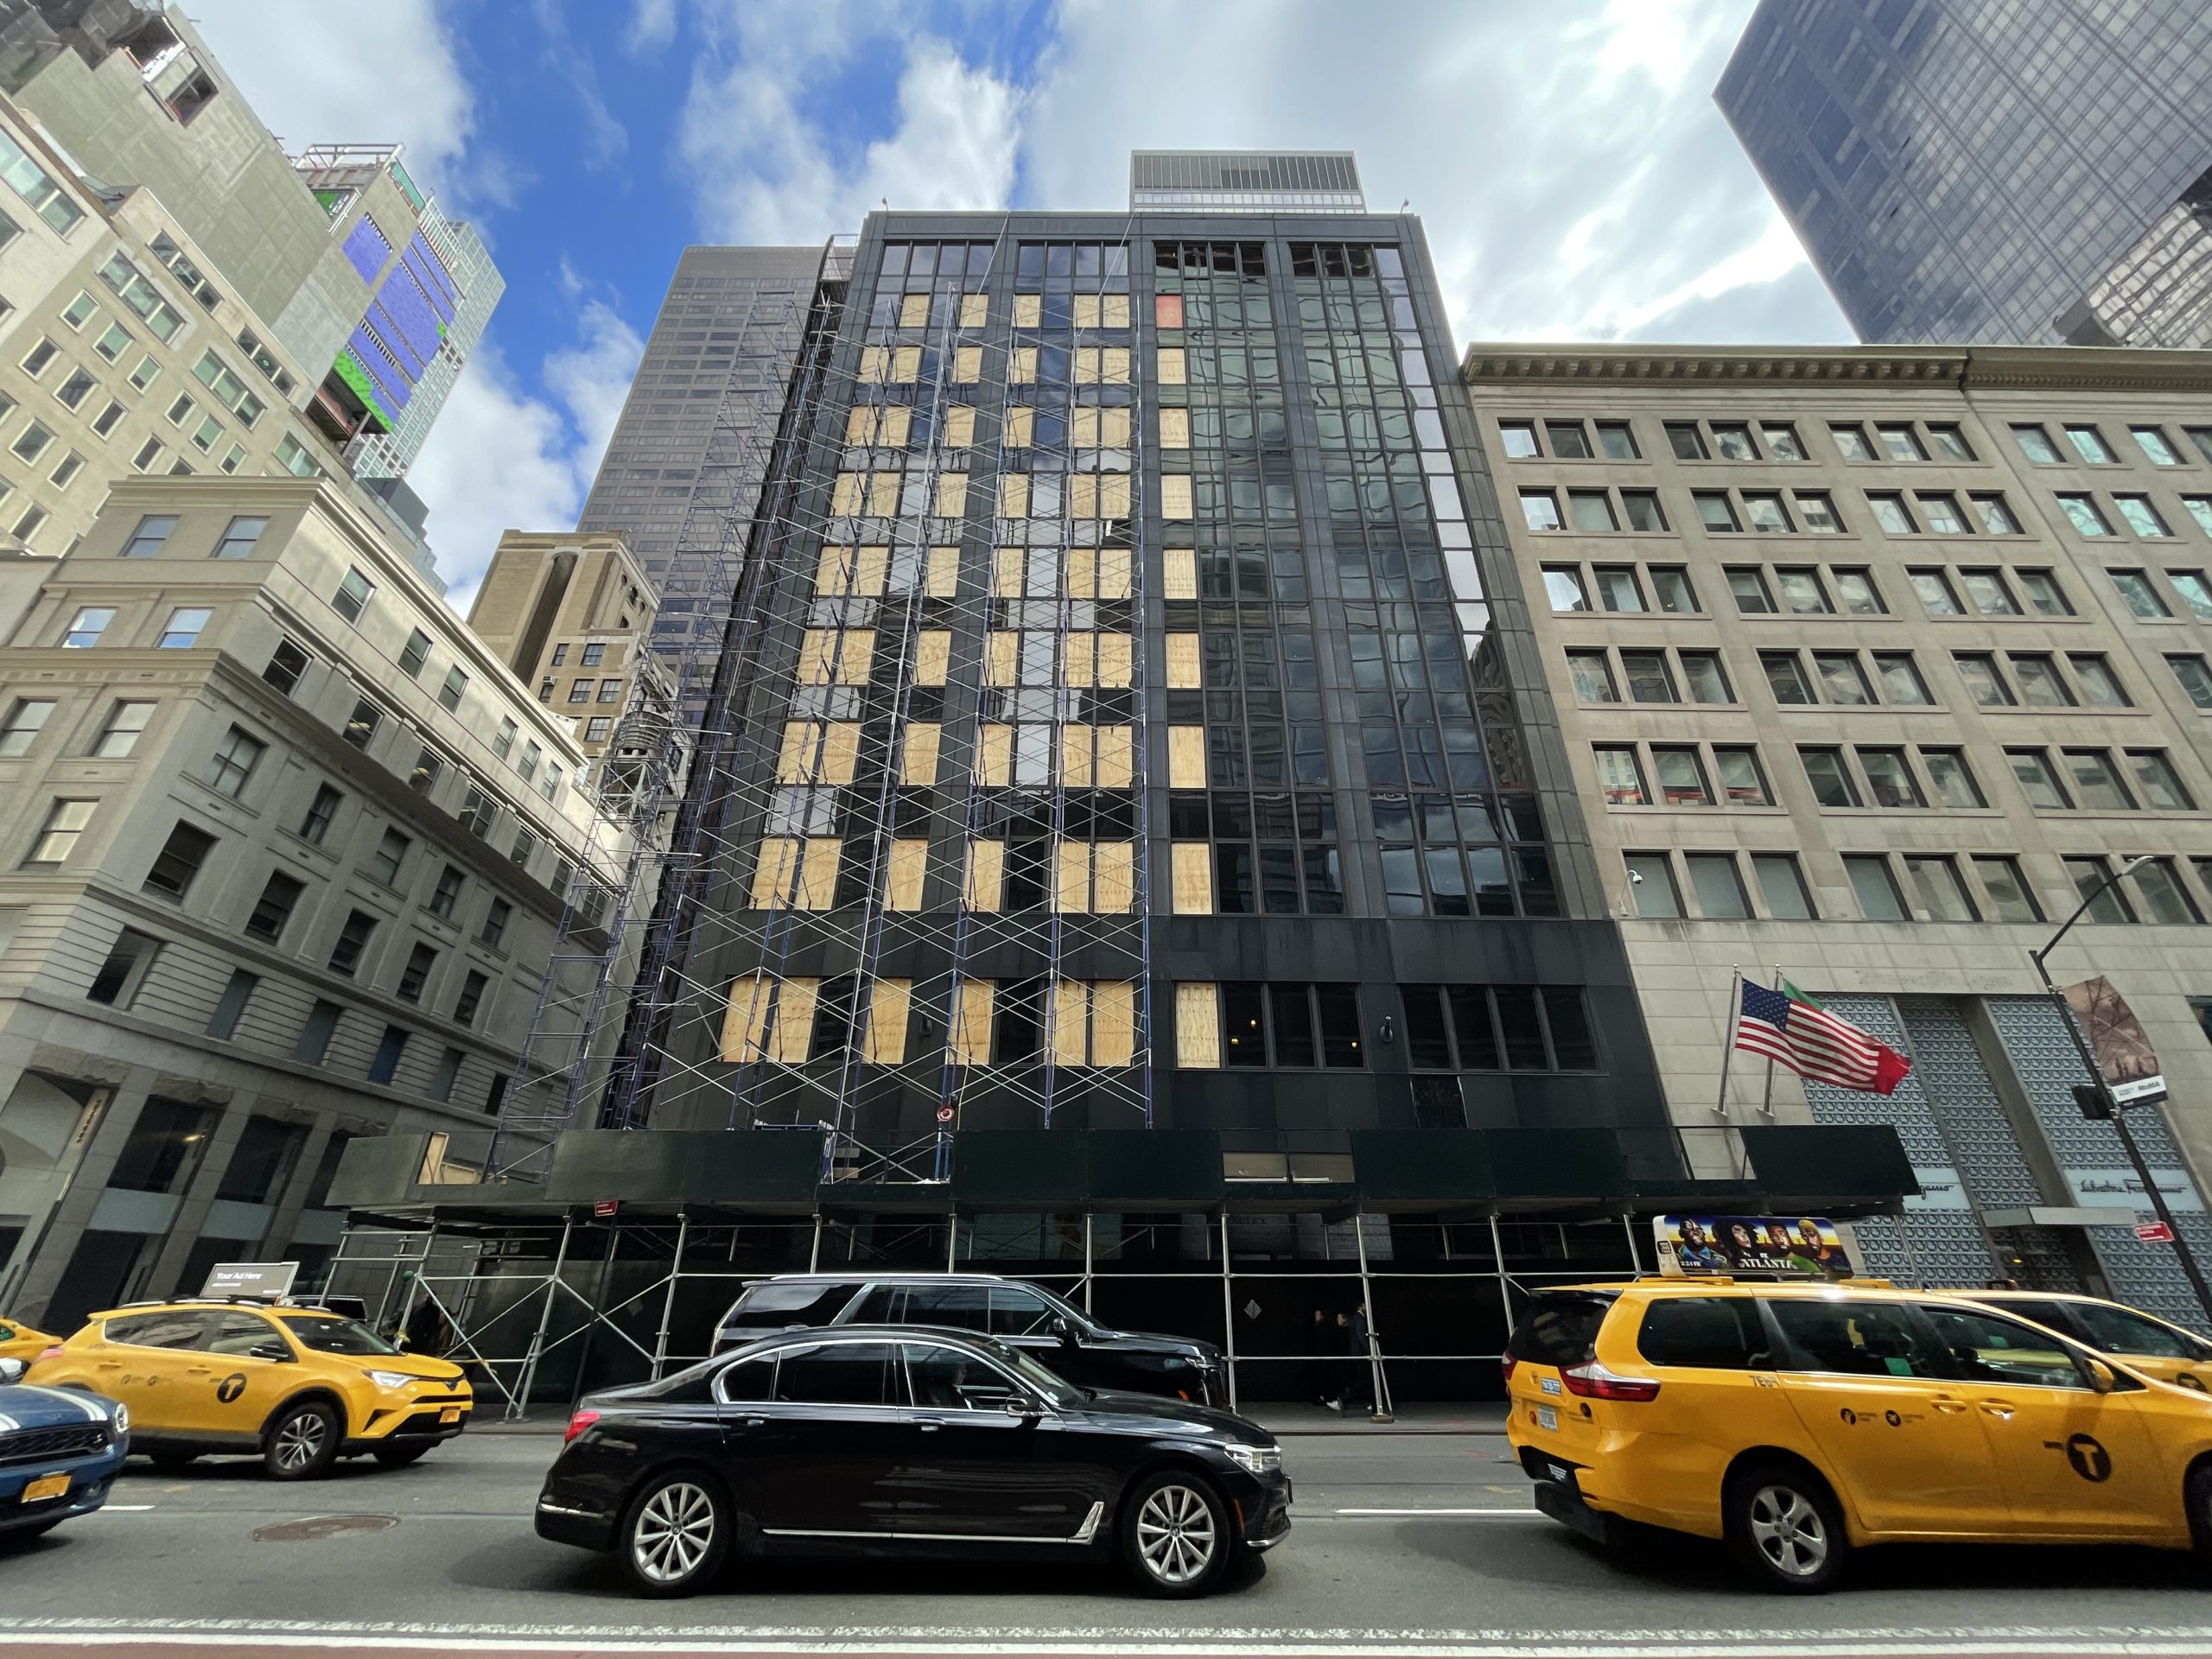 Demolition Begins for Rolex Headquarters at 665 in Midtown, Manhattan - New YIMBY